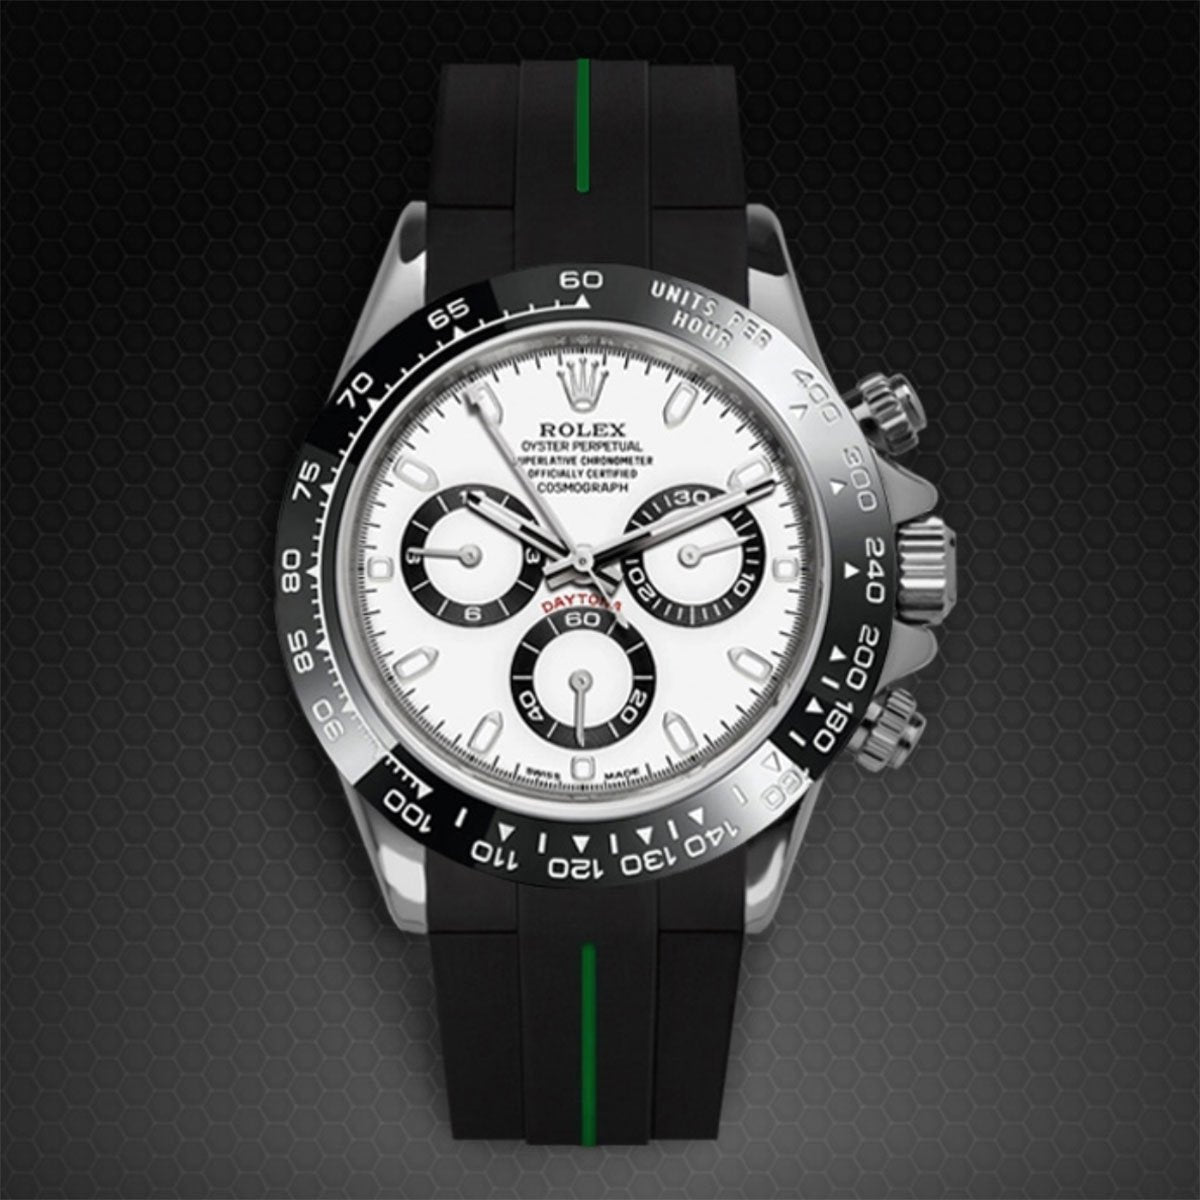 The best straps for your Rolex Daytona